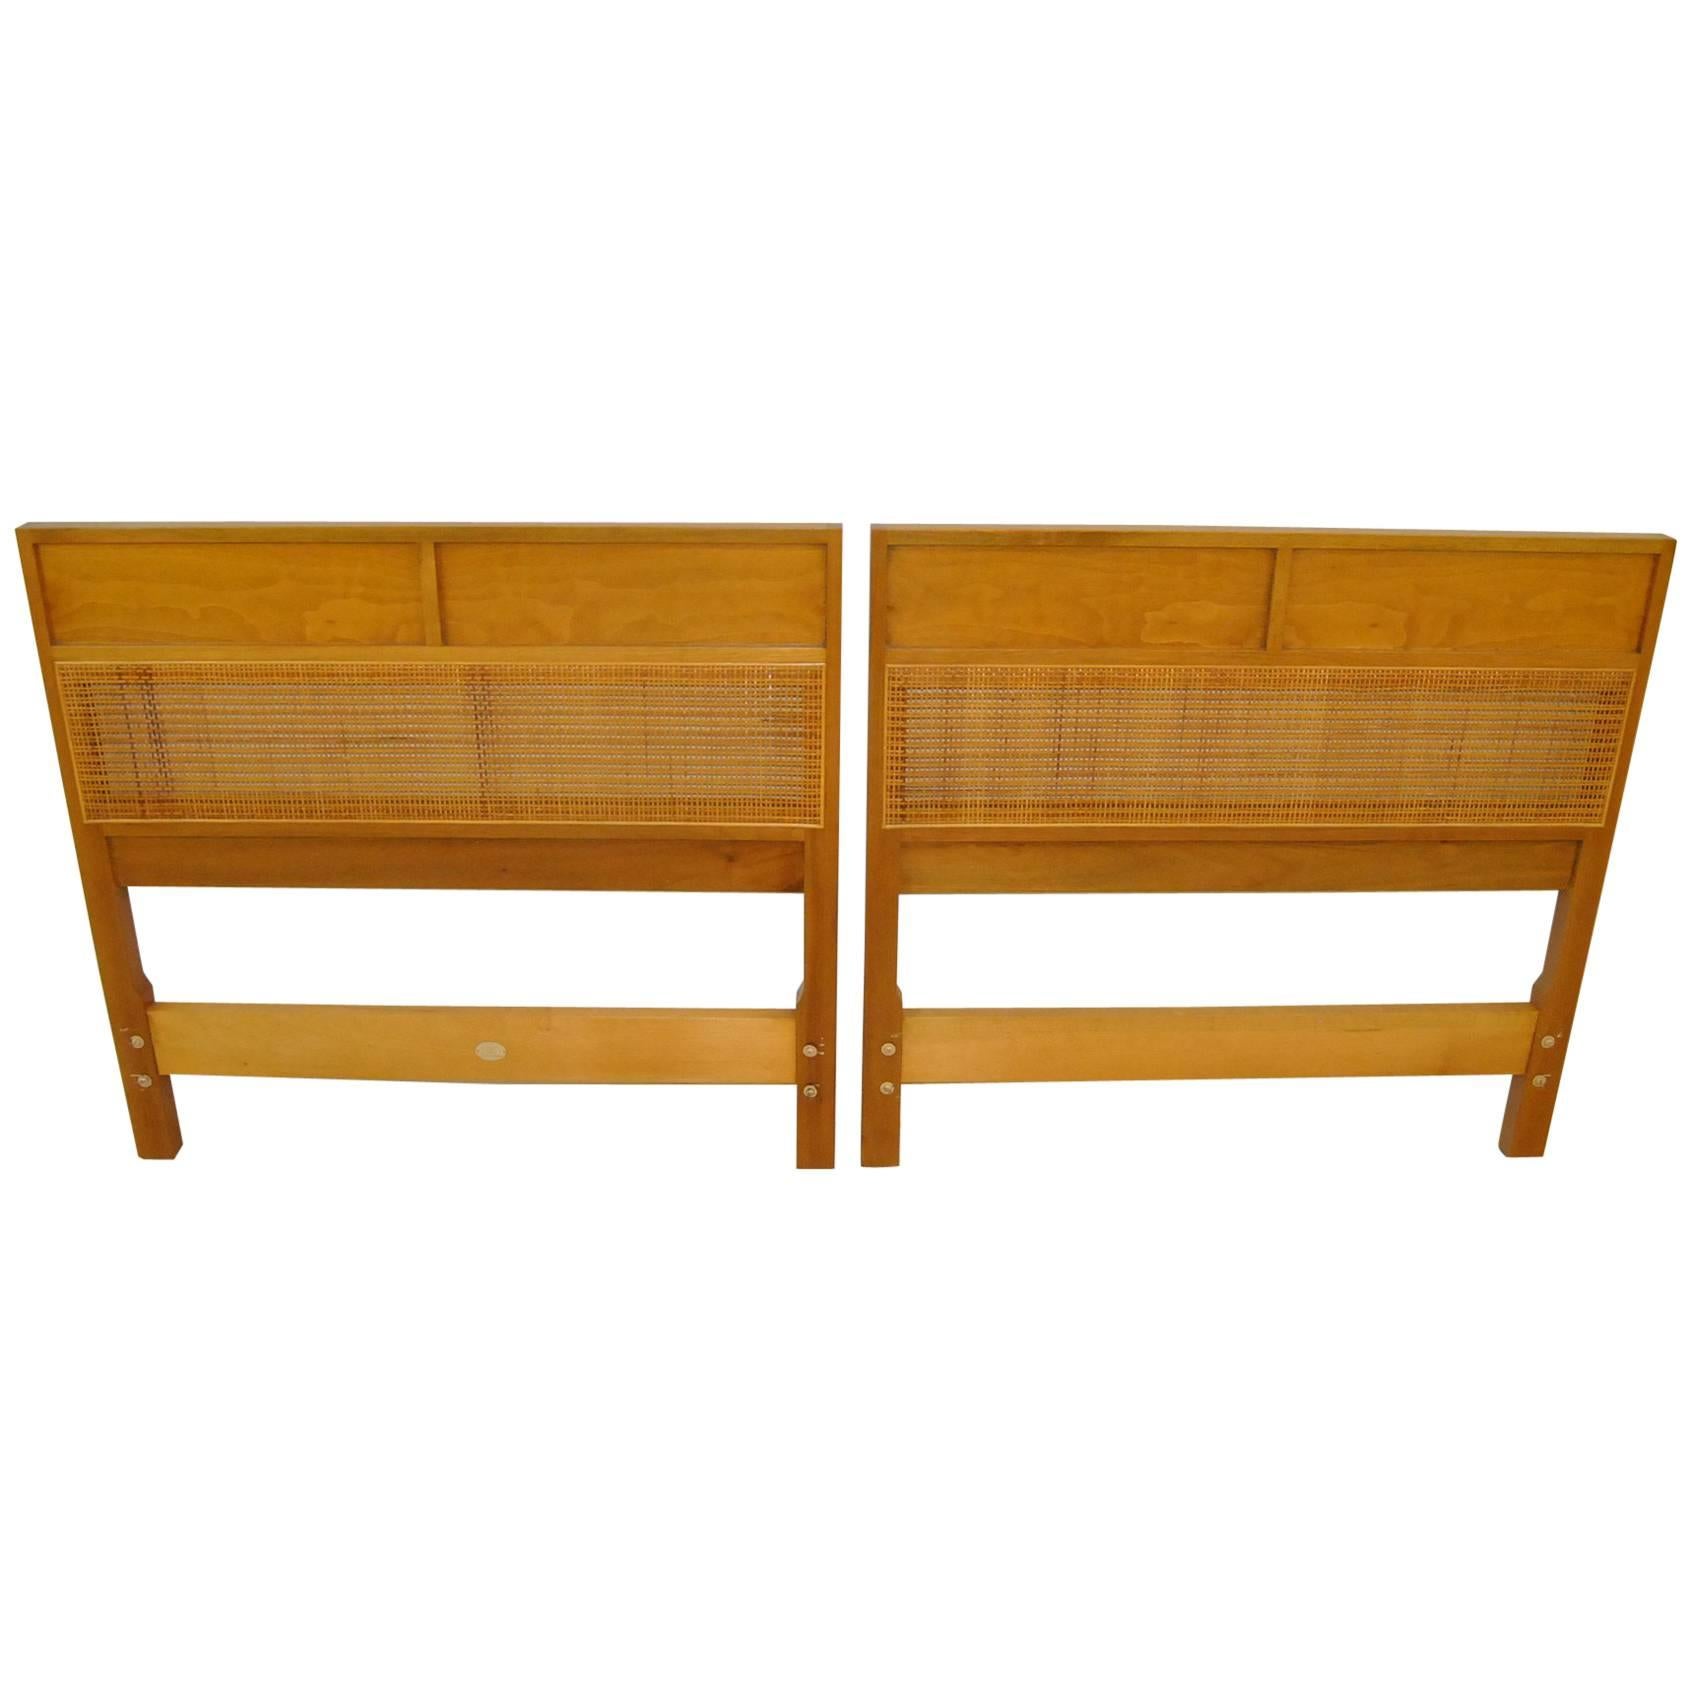 Pair of Mid-Century Modern Mahogany Twin Size Headboards by Baker Furniture